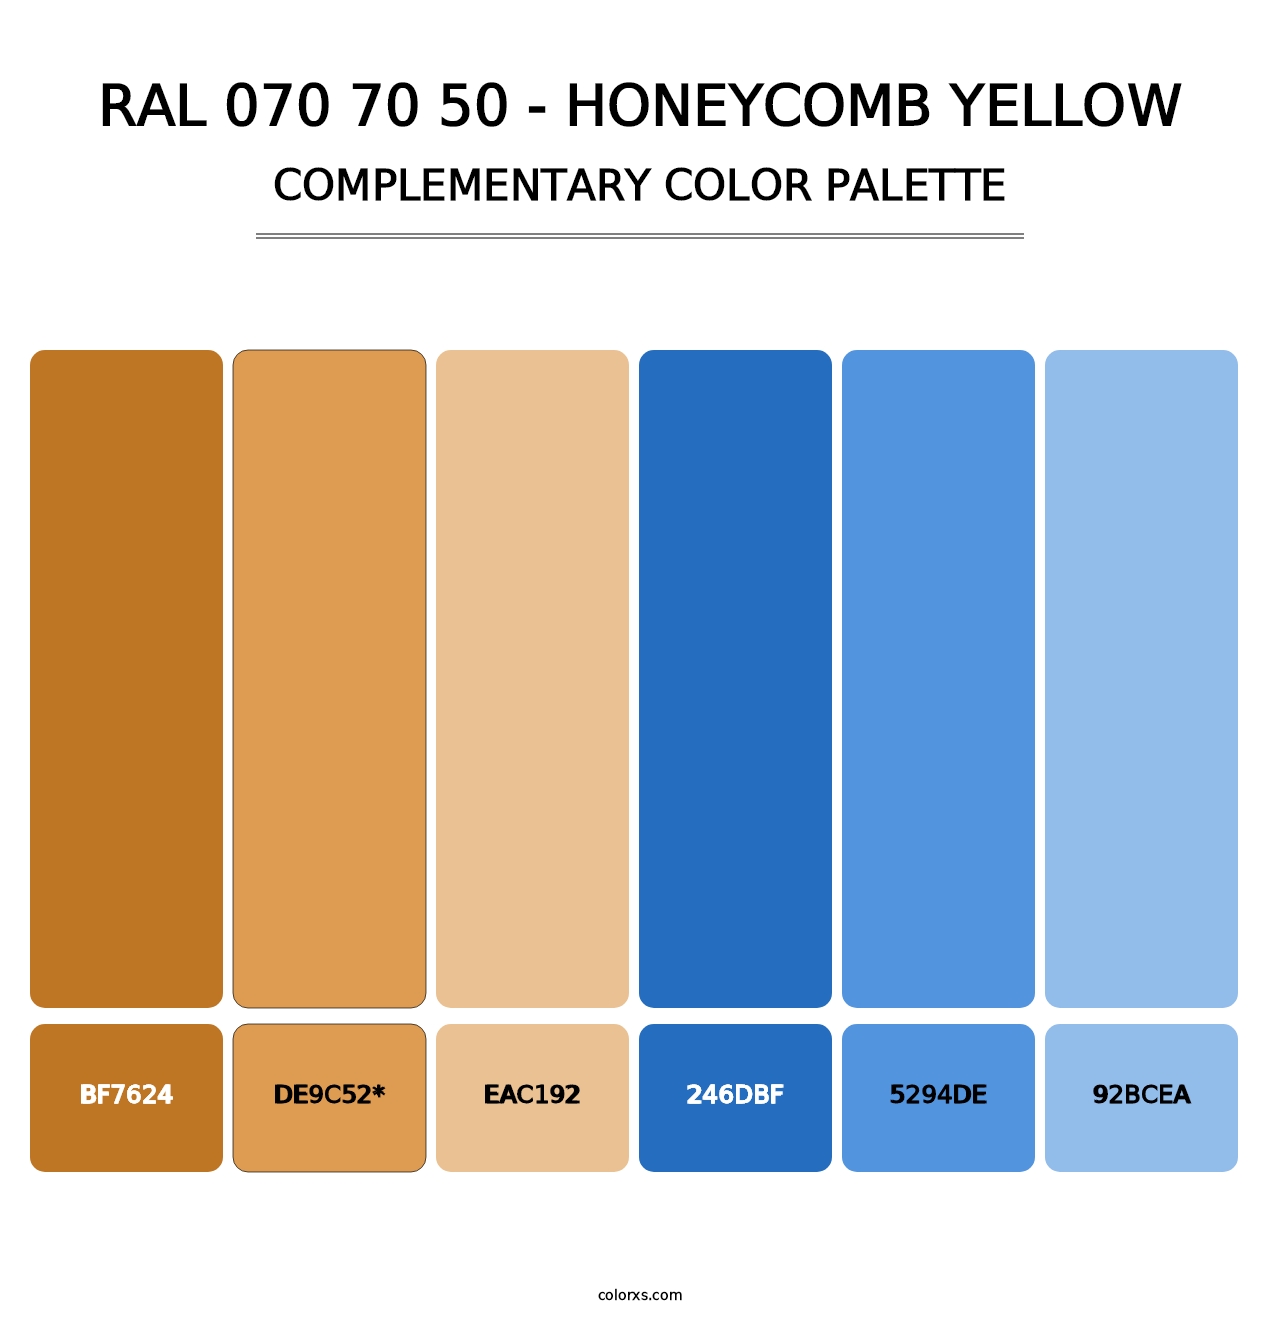 RAL 070 70 50 - Honeycomb Yellow - Complementary Color Palette